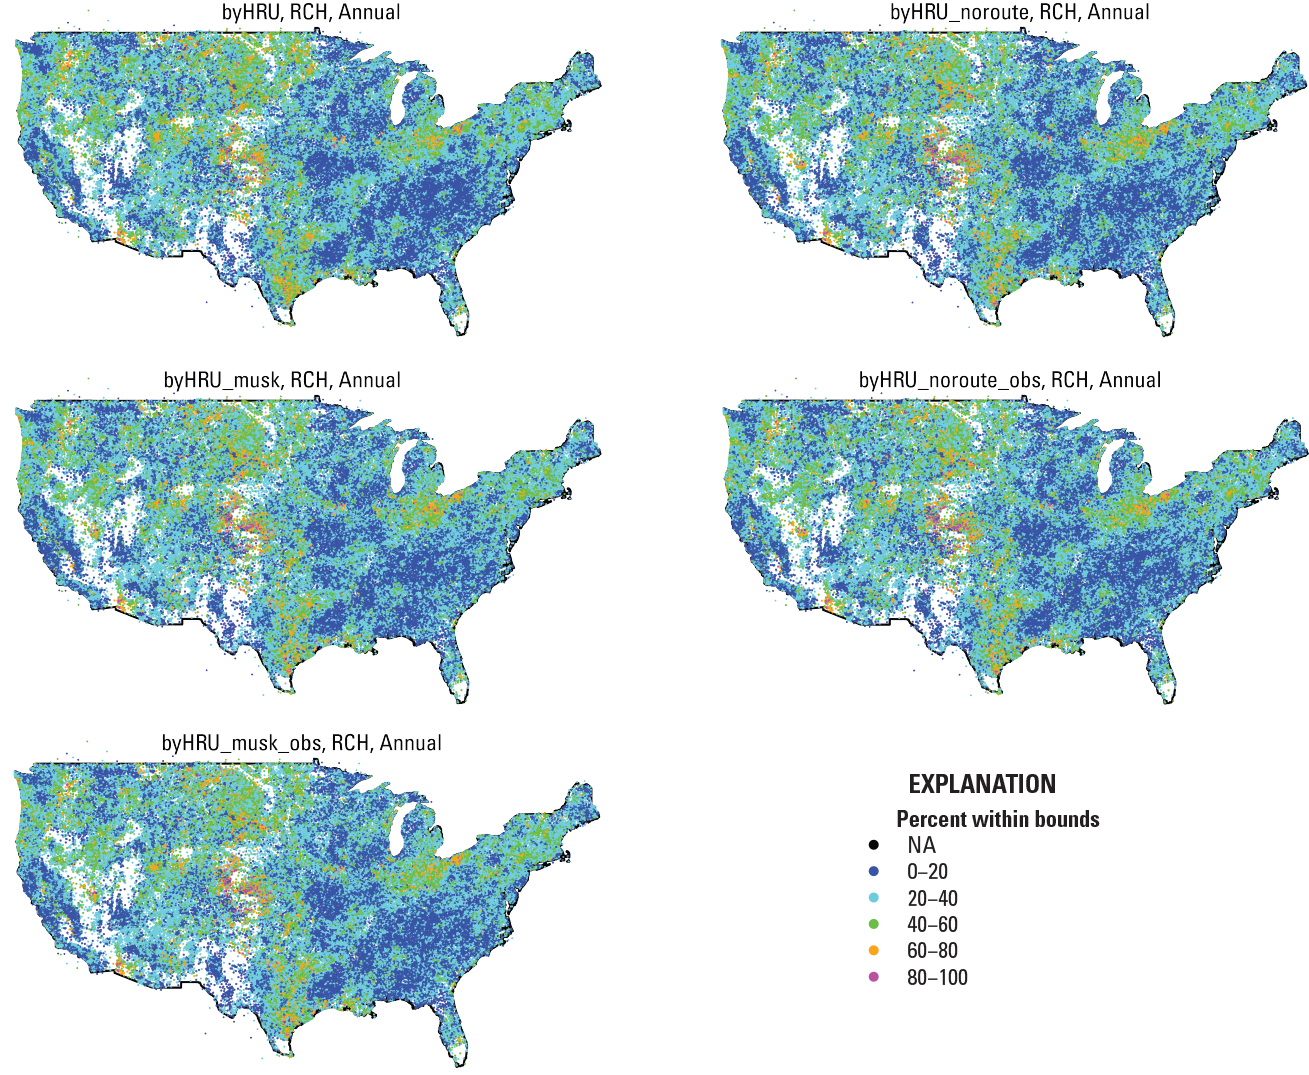 The annual maps show a better measured baseline fit with greater accuracy in the western
                        half of the United States than in the eastern half